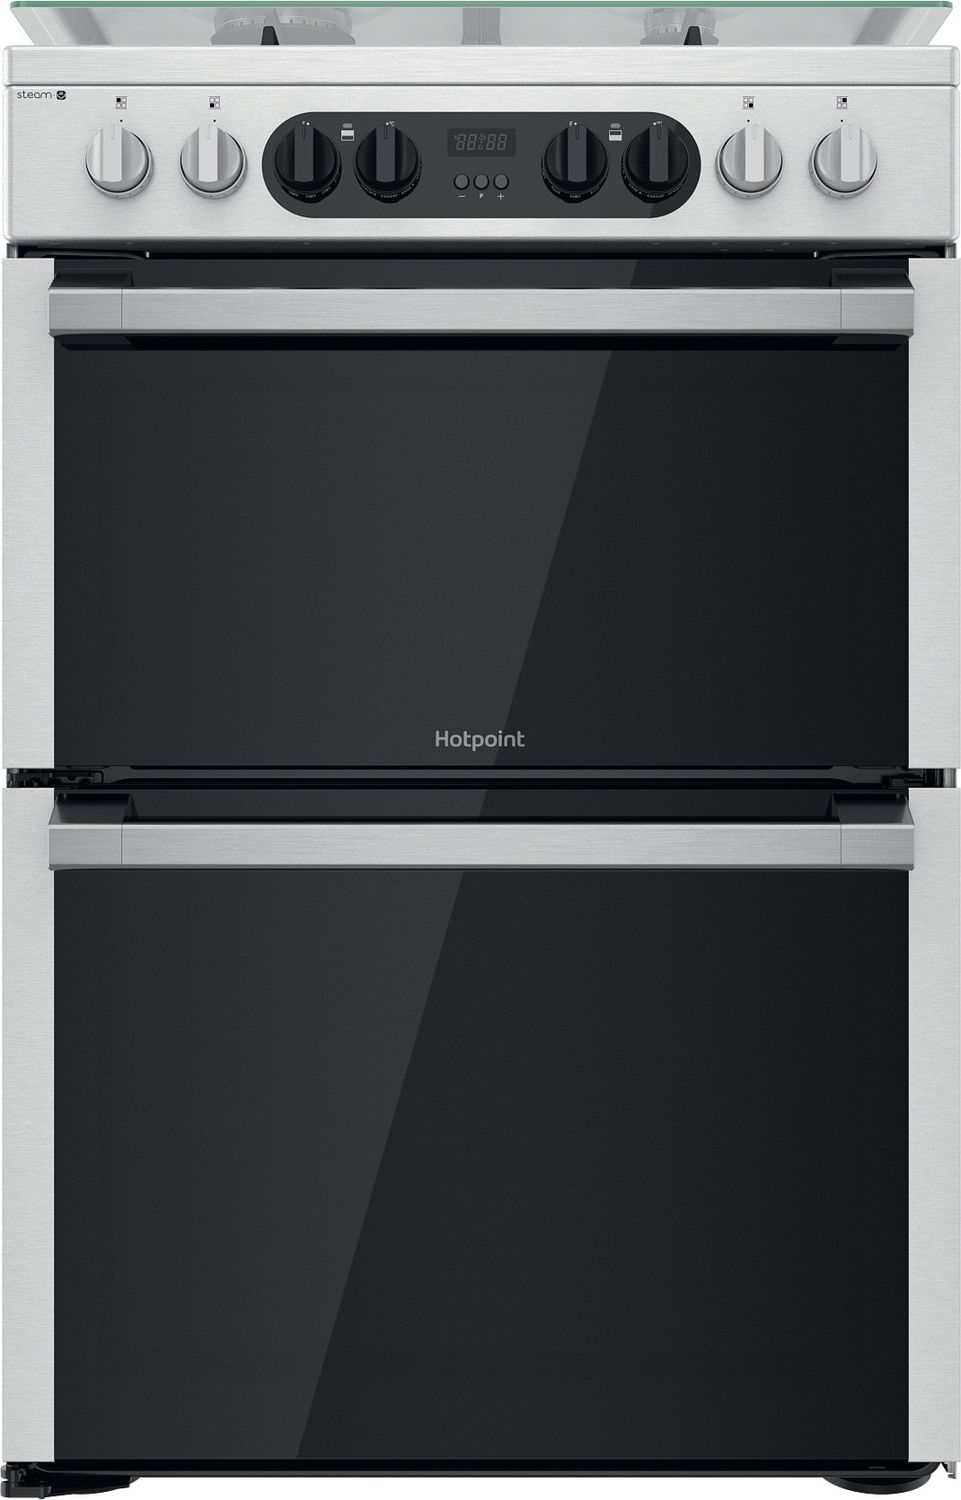 Hotpoint HDM67G8C2CX/UK 60cm Freestanding Dual Fuel Cooker - Stainless Steel - A/A Rated, Stainless Steel